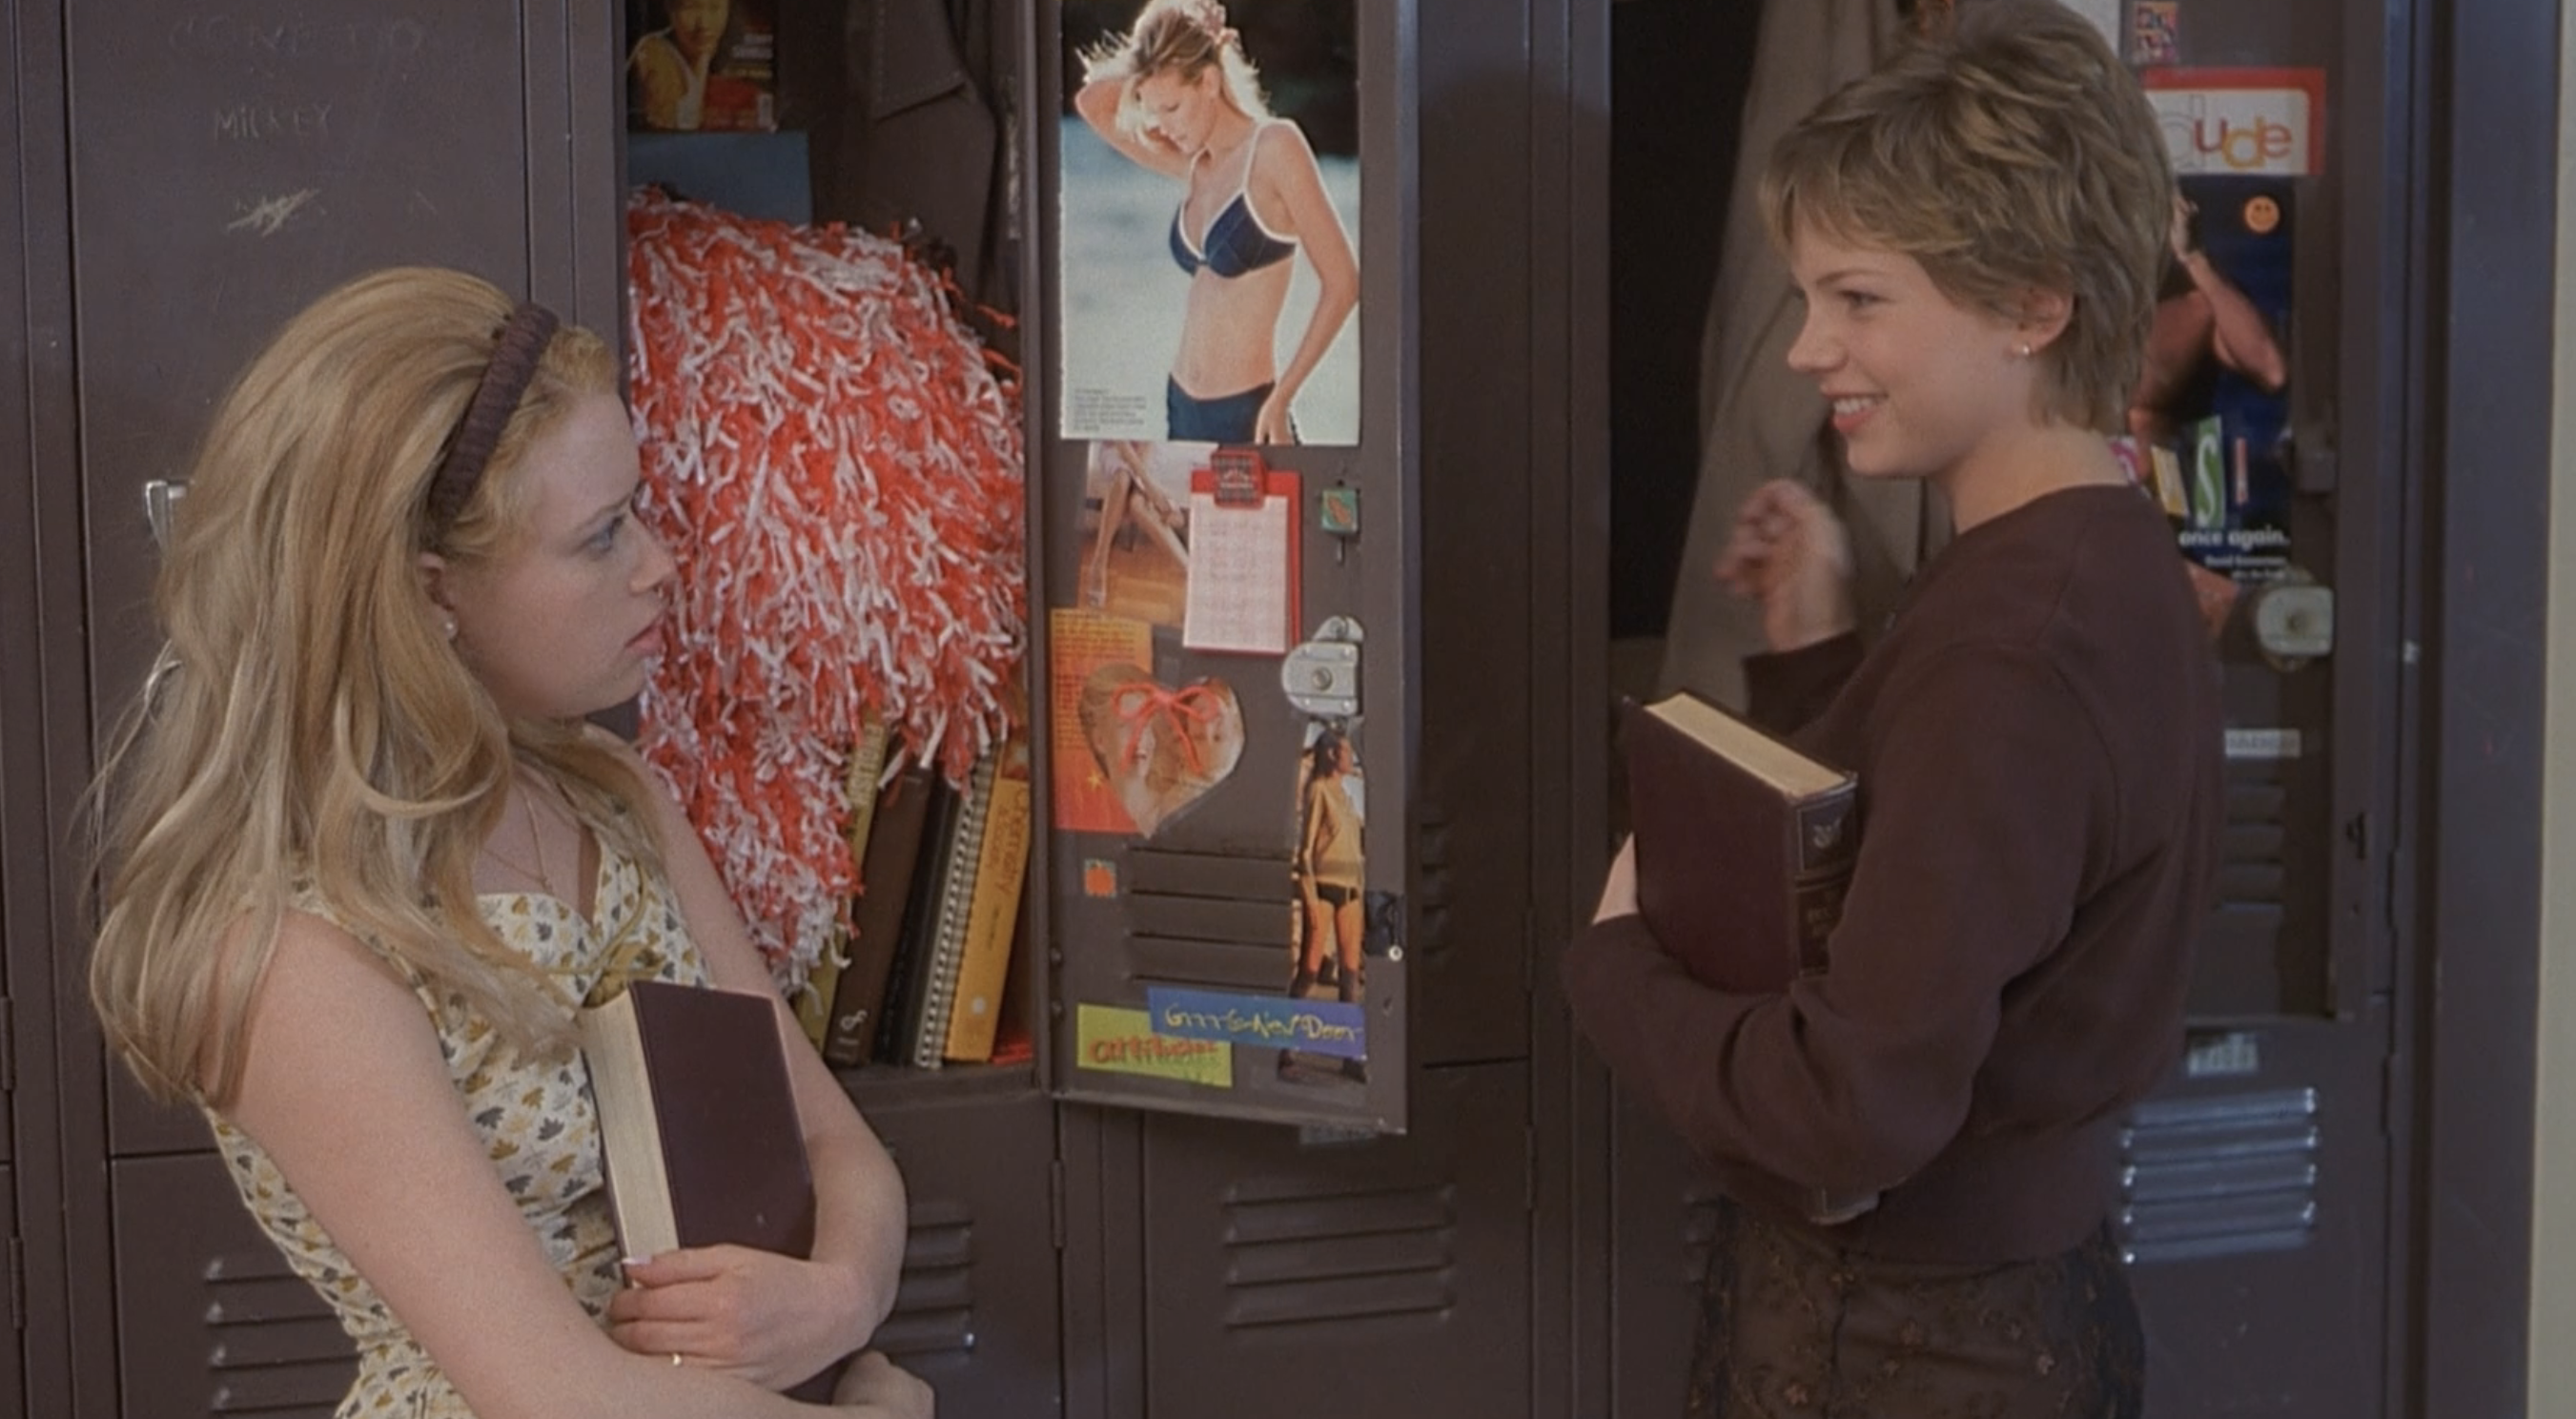 natasha and michelle williams standing at their lockers